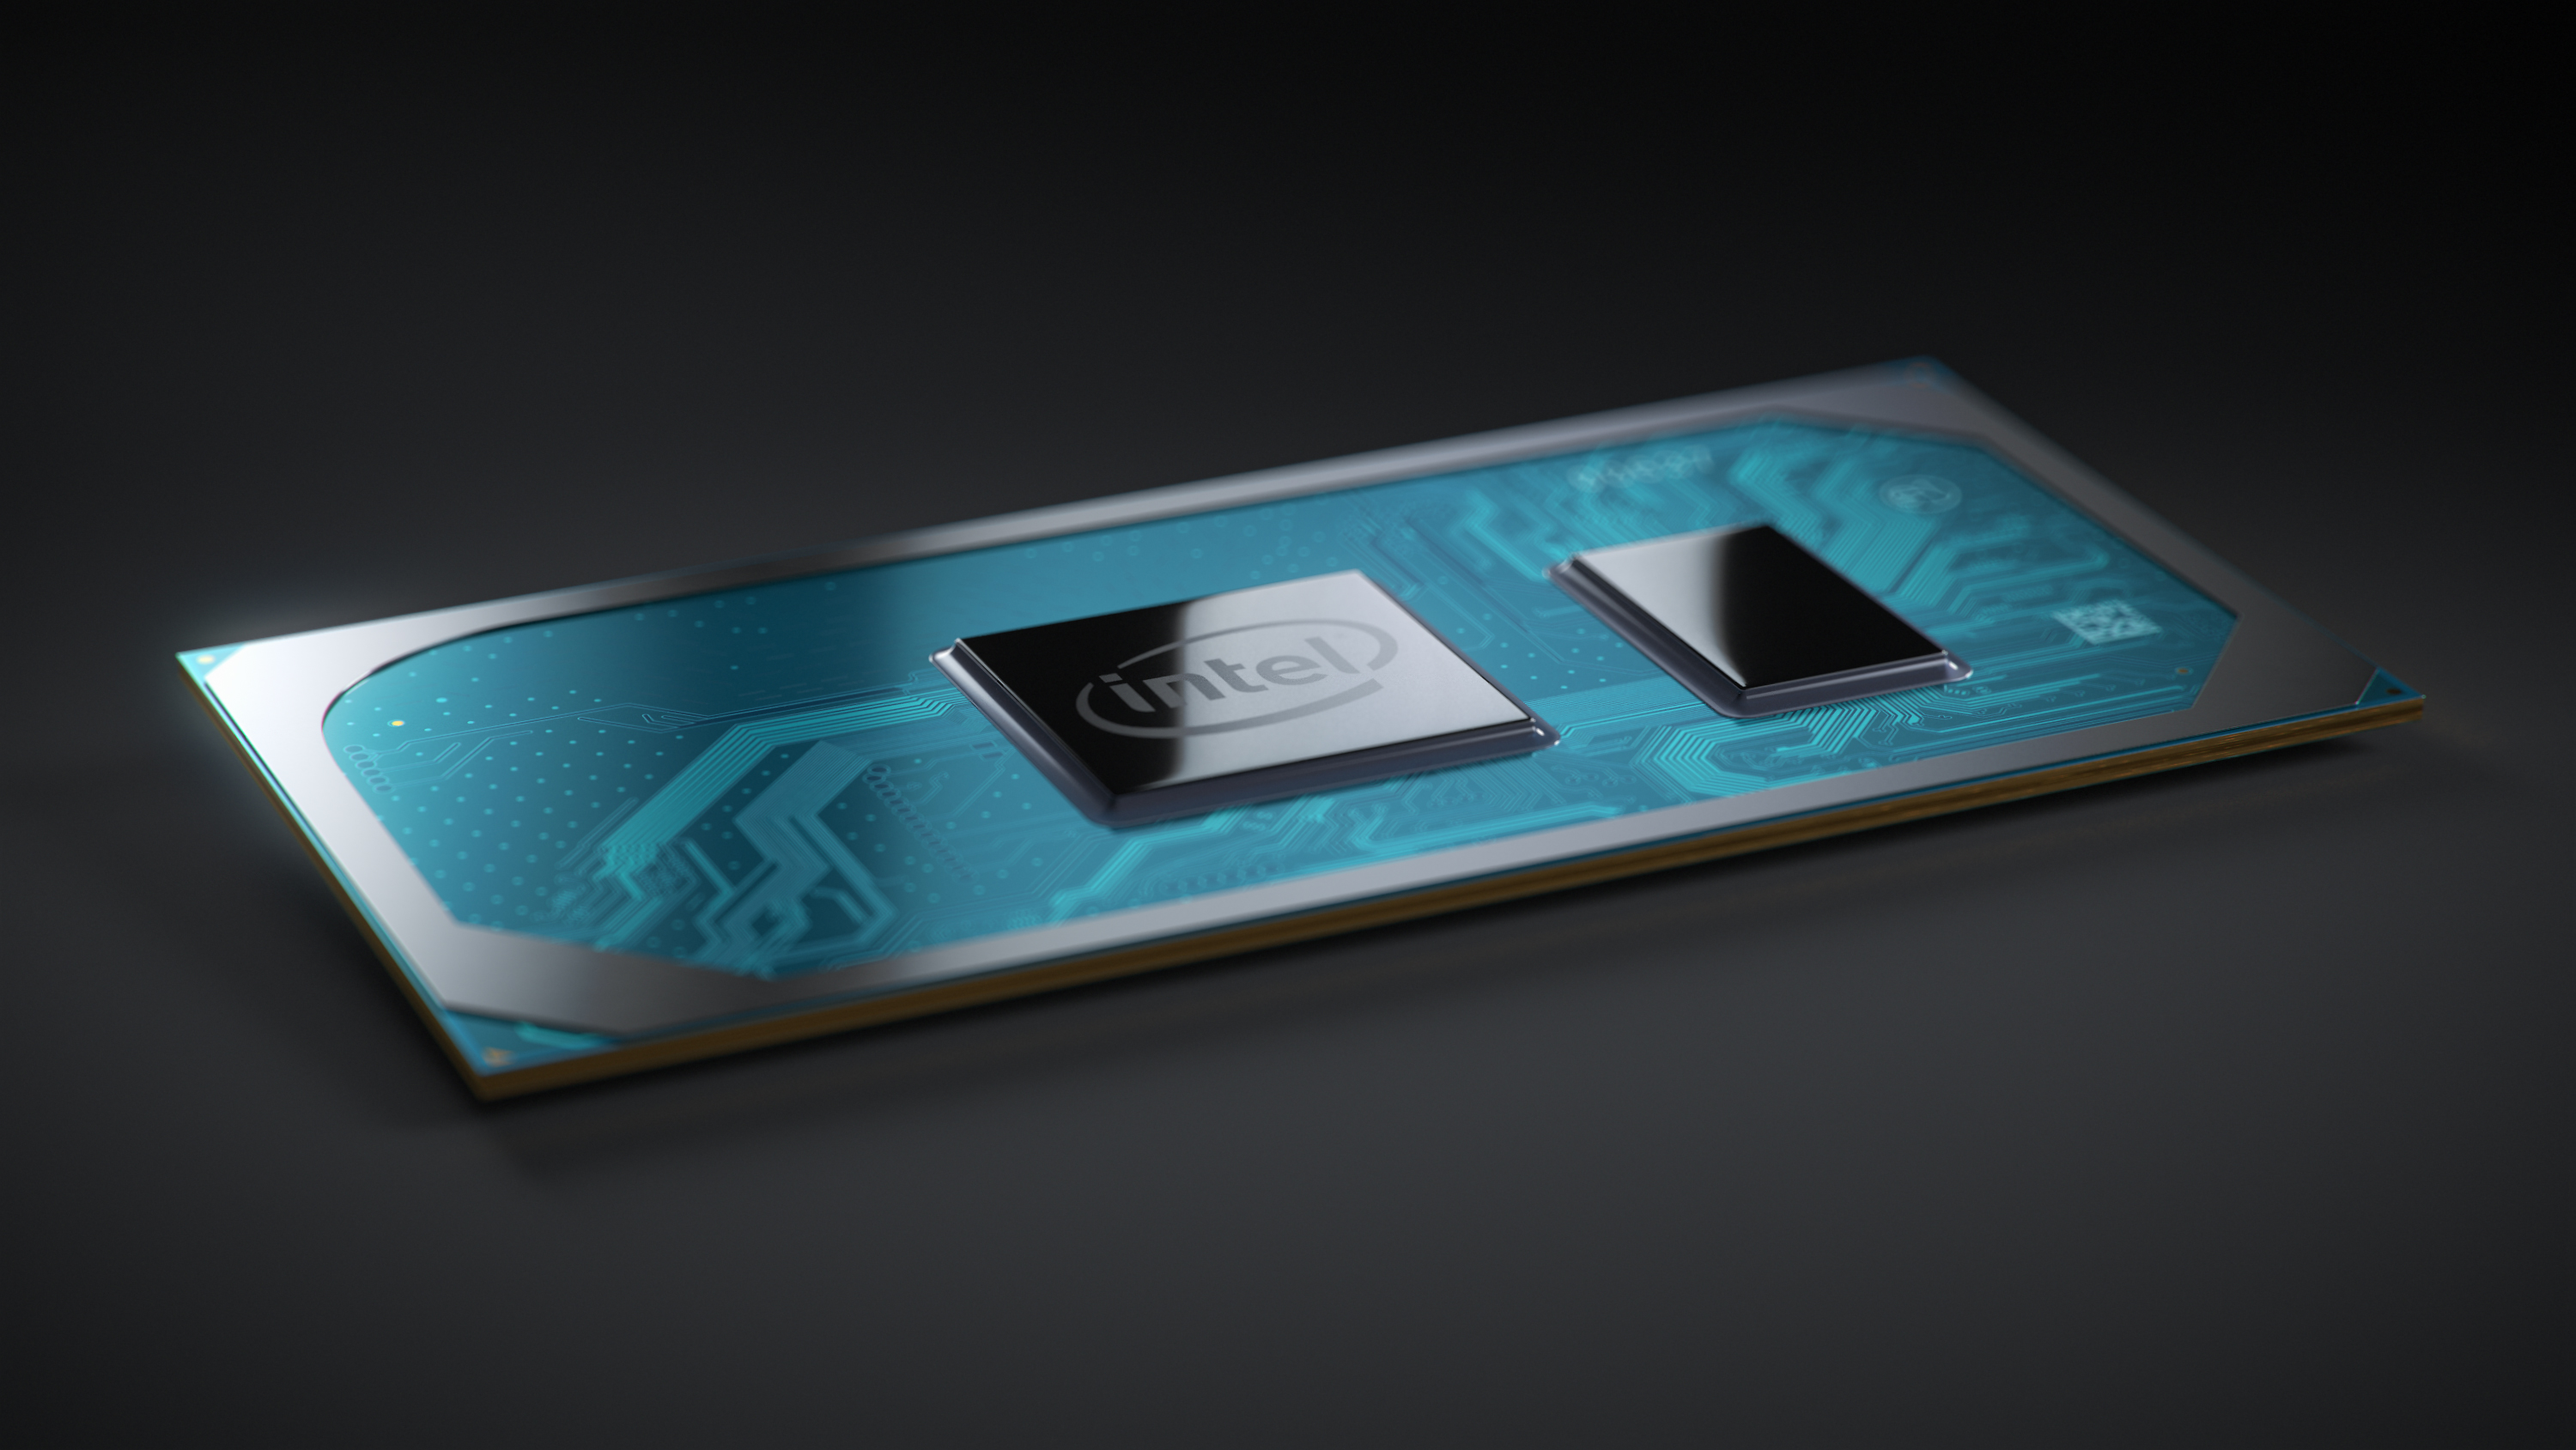 Intel launches first 10th Gen Ice Lake CPUs with 10nm fabrication